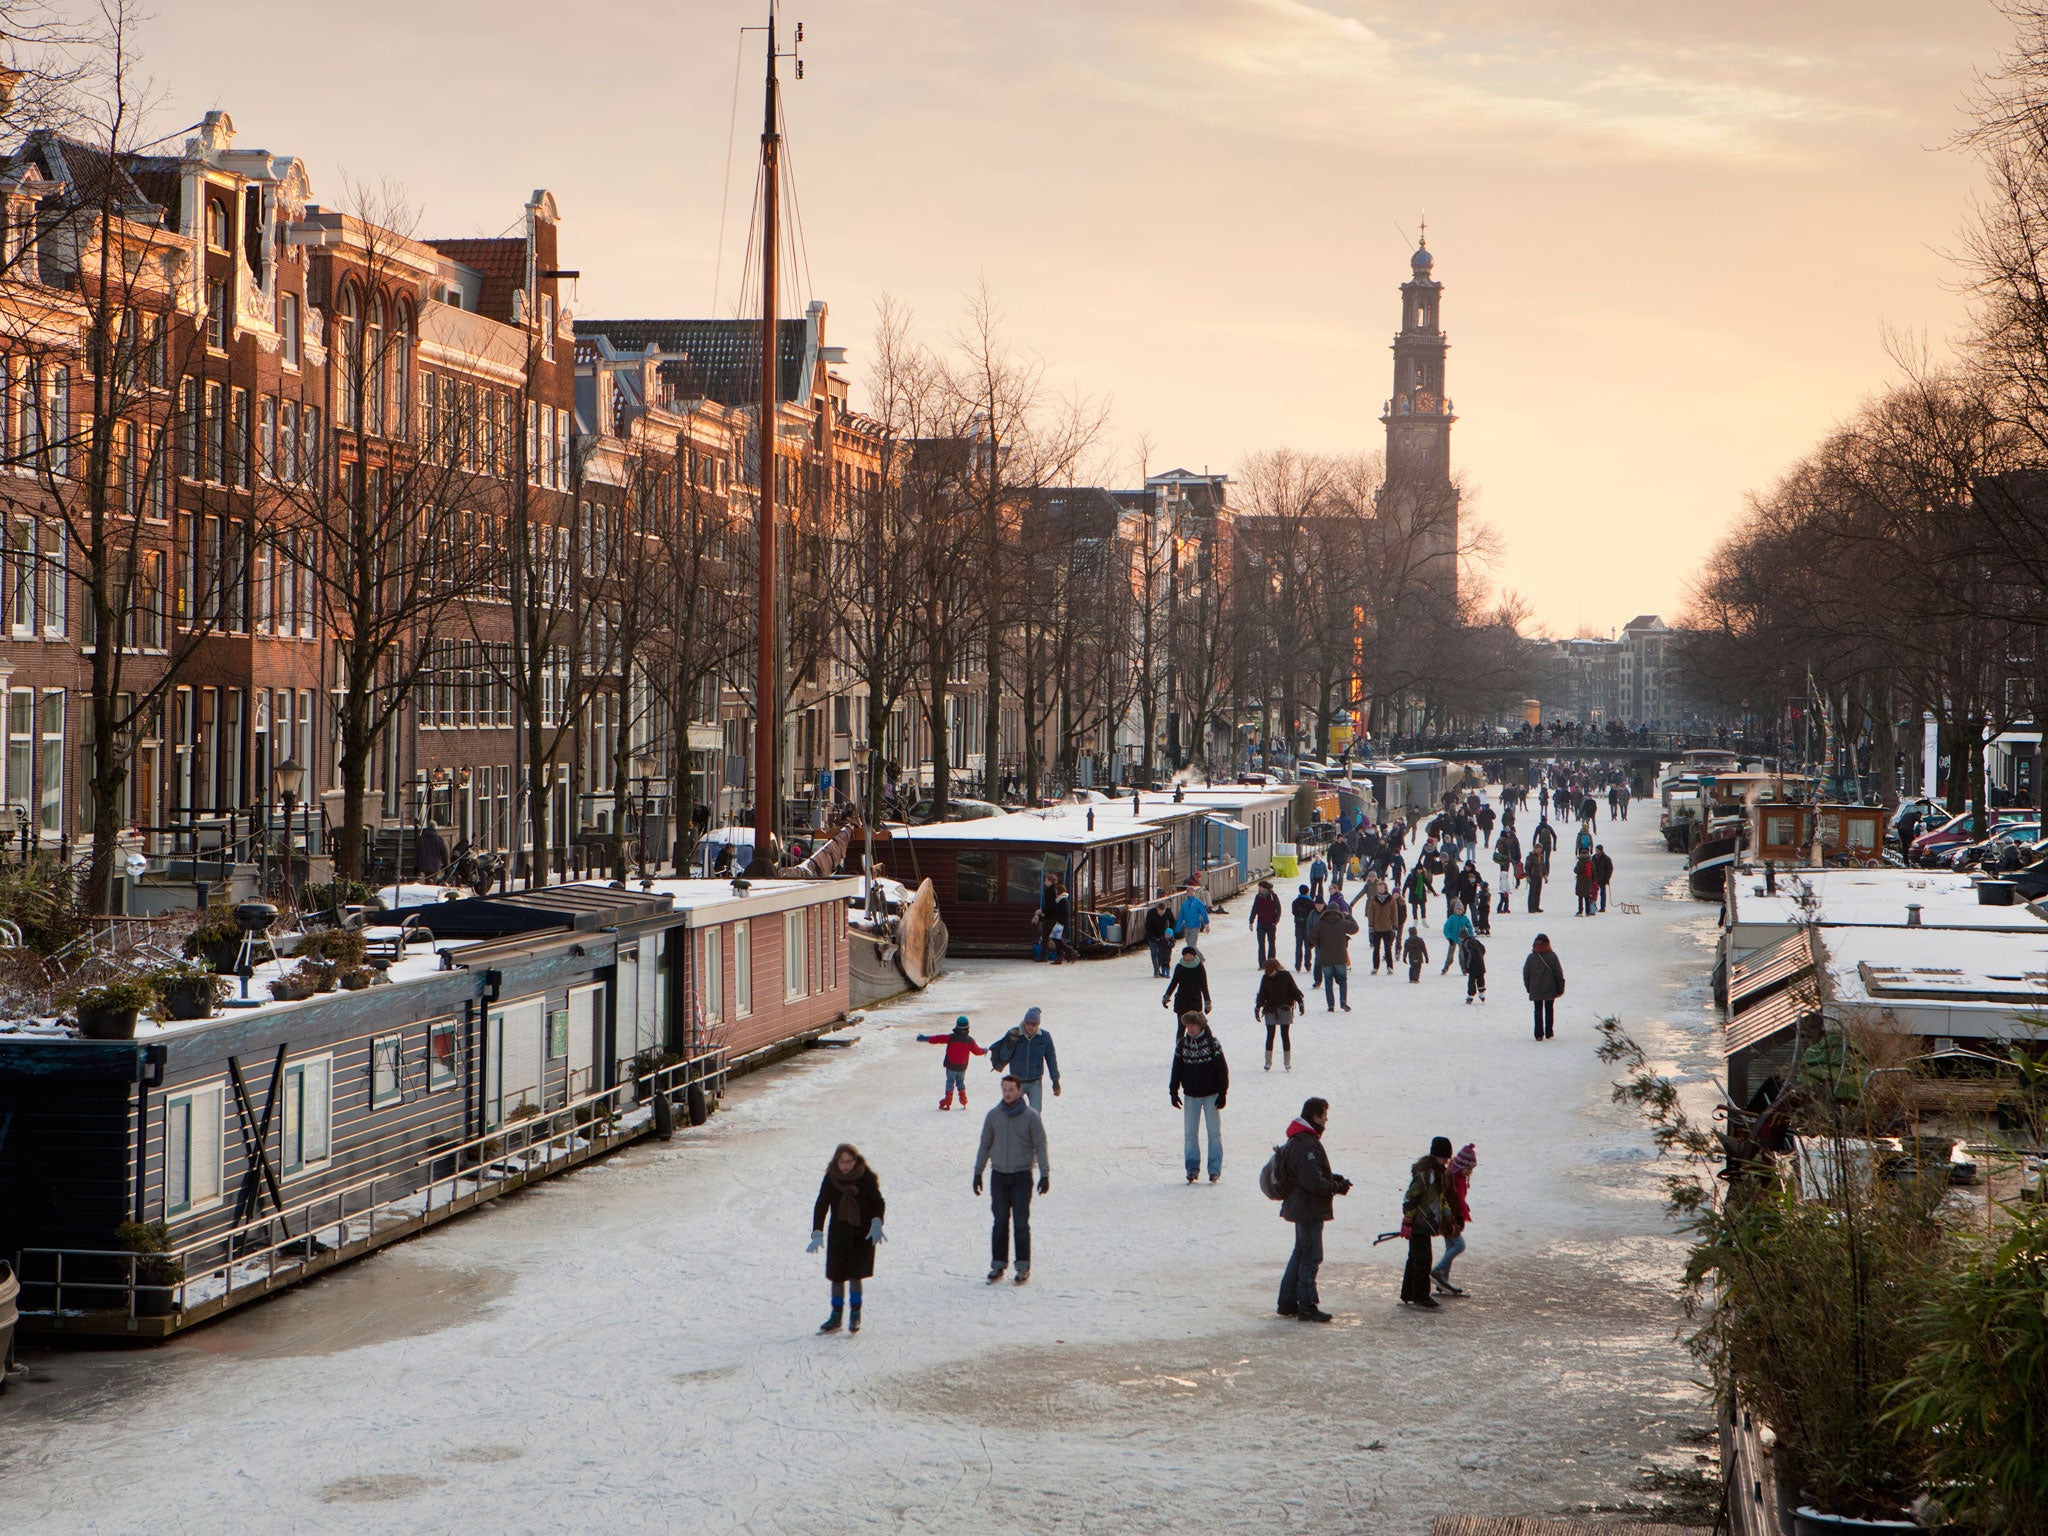 Imagine you’re skating down one of Amsterdam’s frozen canals